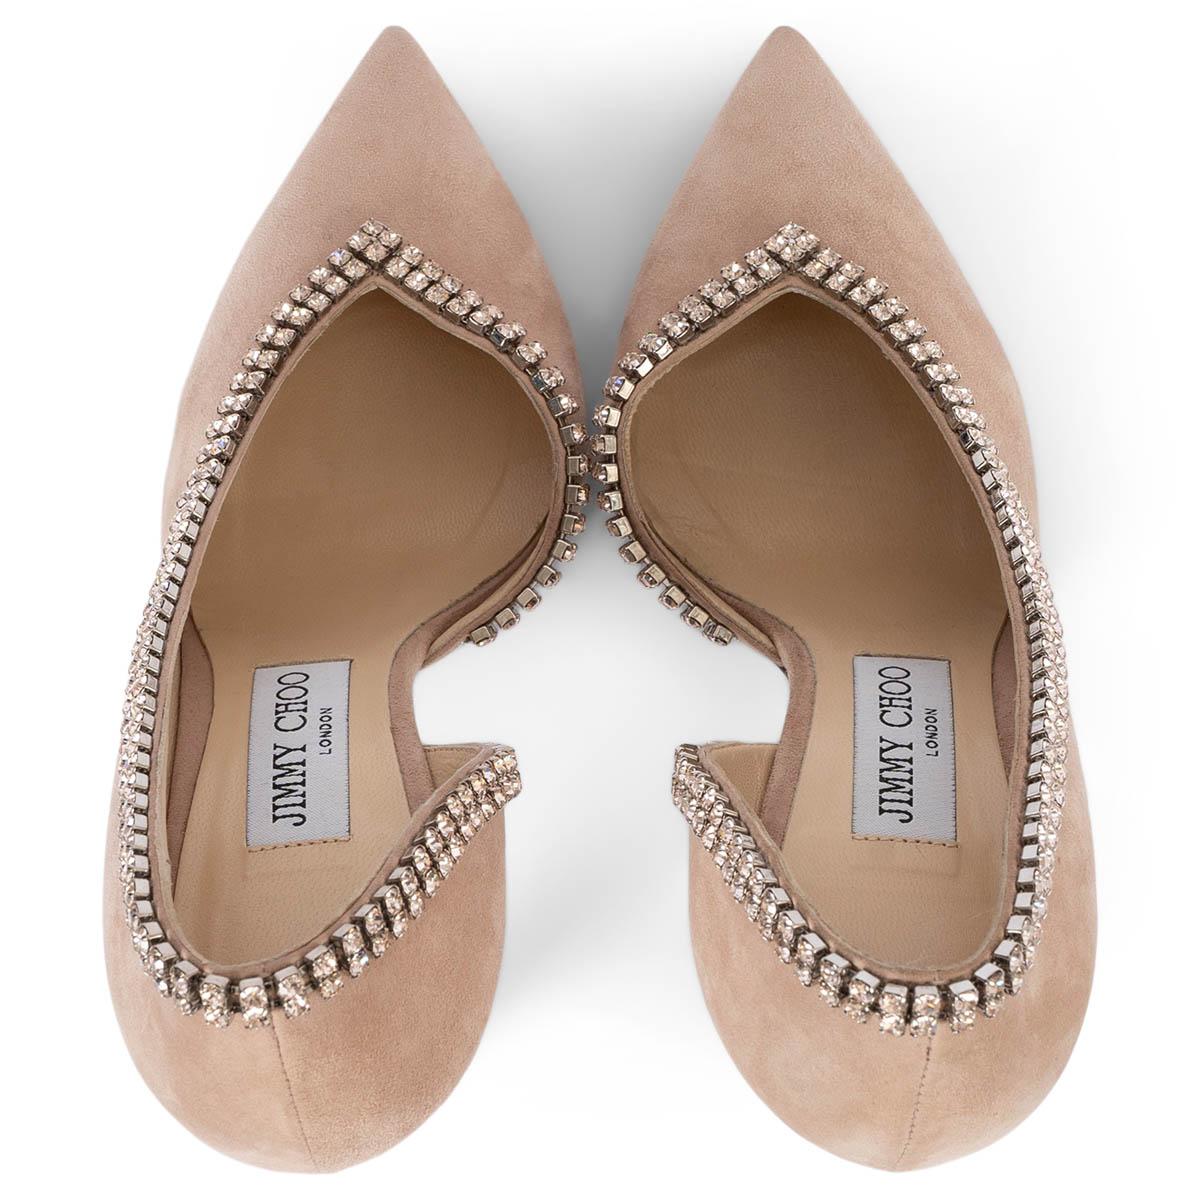 JIMMY CHOO blush pink suede LILIAN 100 CRYSTAL Pumps Shoes 36 For Sale 2